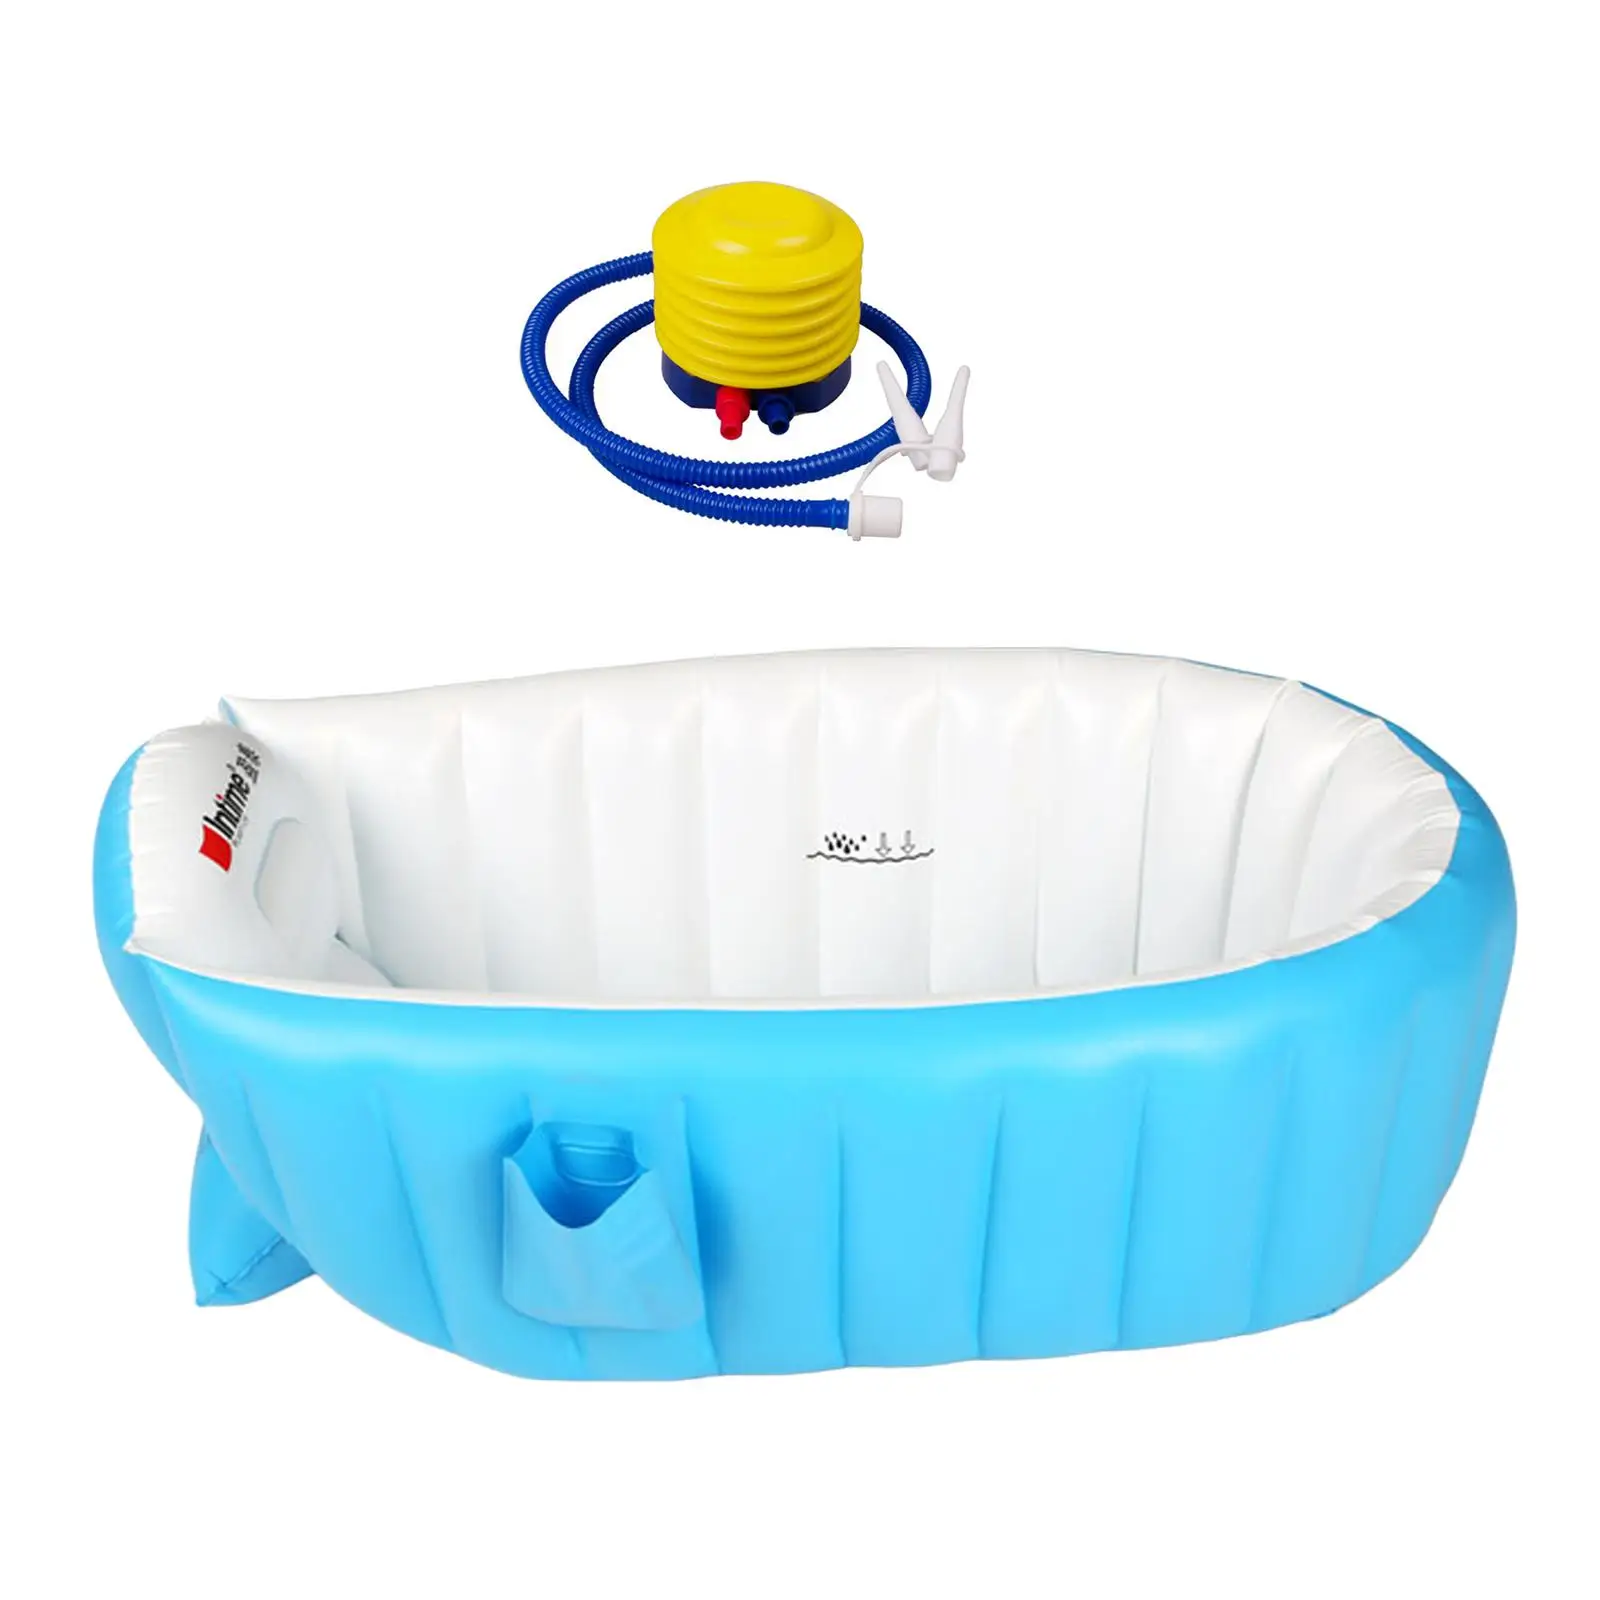 Inflatable Swimming Pool with Air Pump Anti Slip Baby Shower Pool Inflatable Baby Bath Tub for Infants Baby Kids Indoor Outdoor